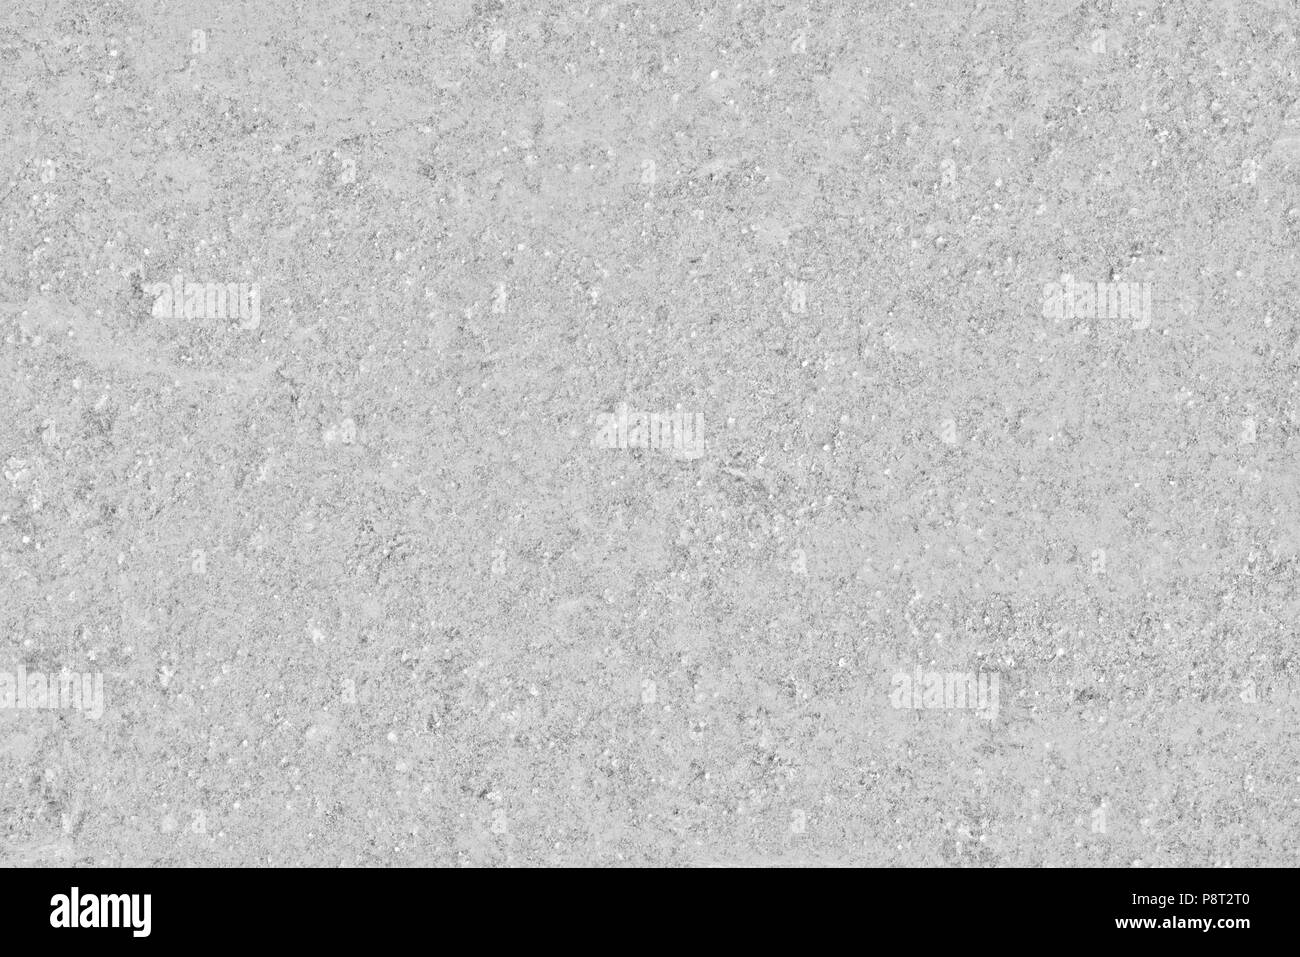 Texture of the stone surface. Gray stone wall texture Stock Photo